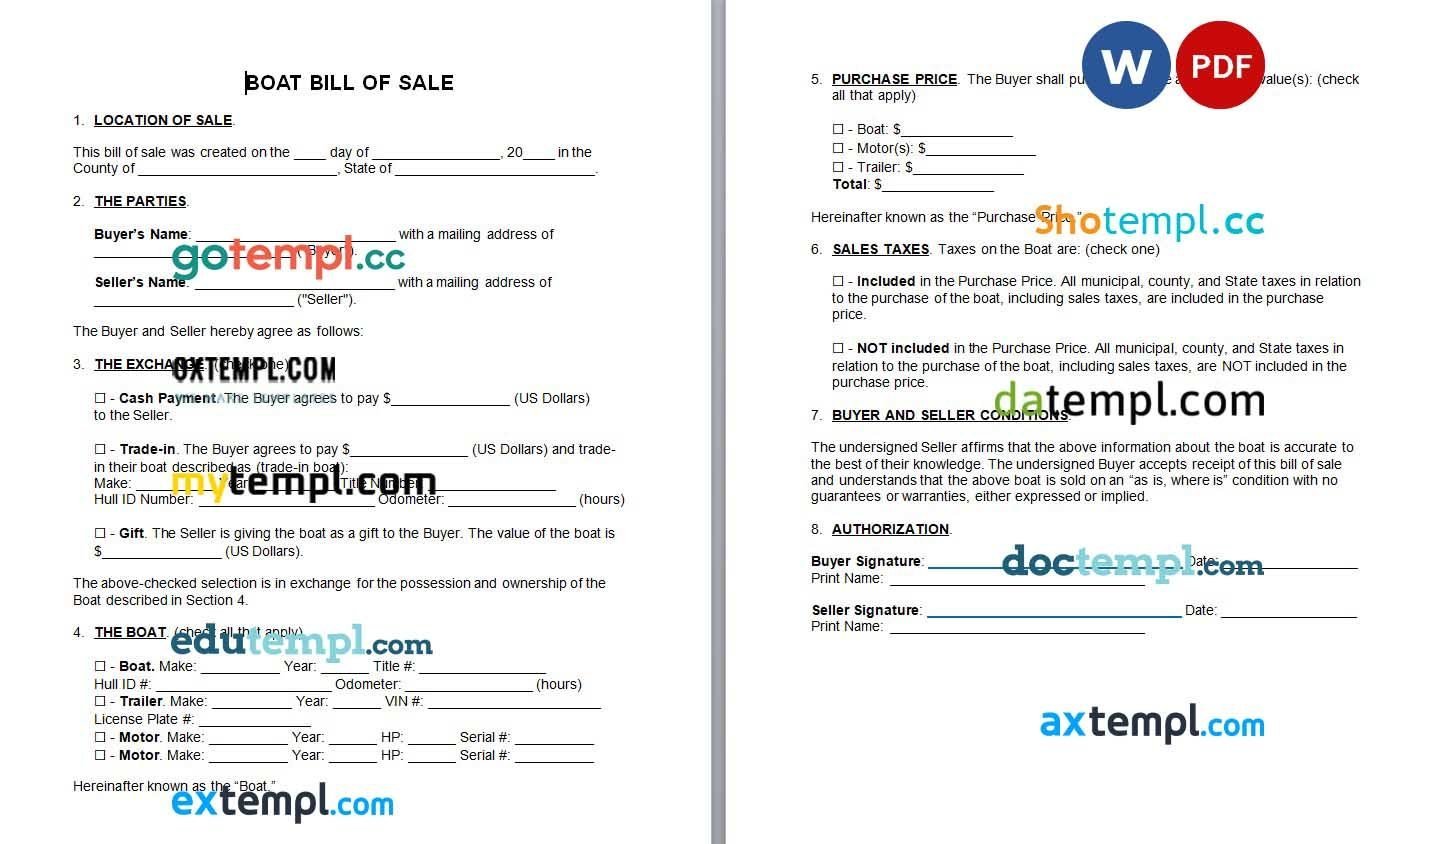 Boat Bill of sale Word example, fully editable